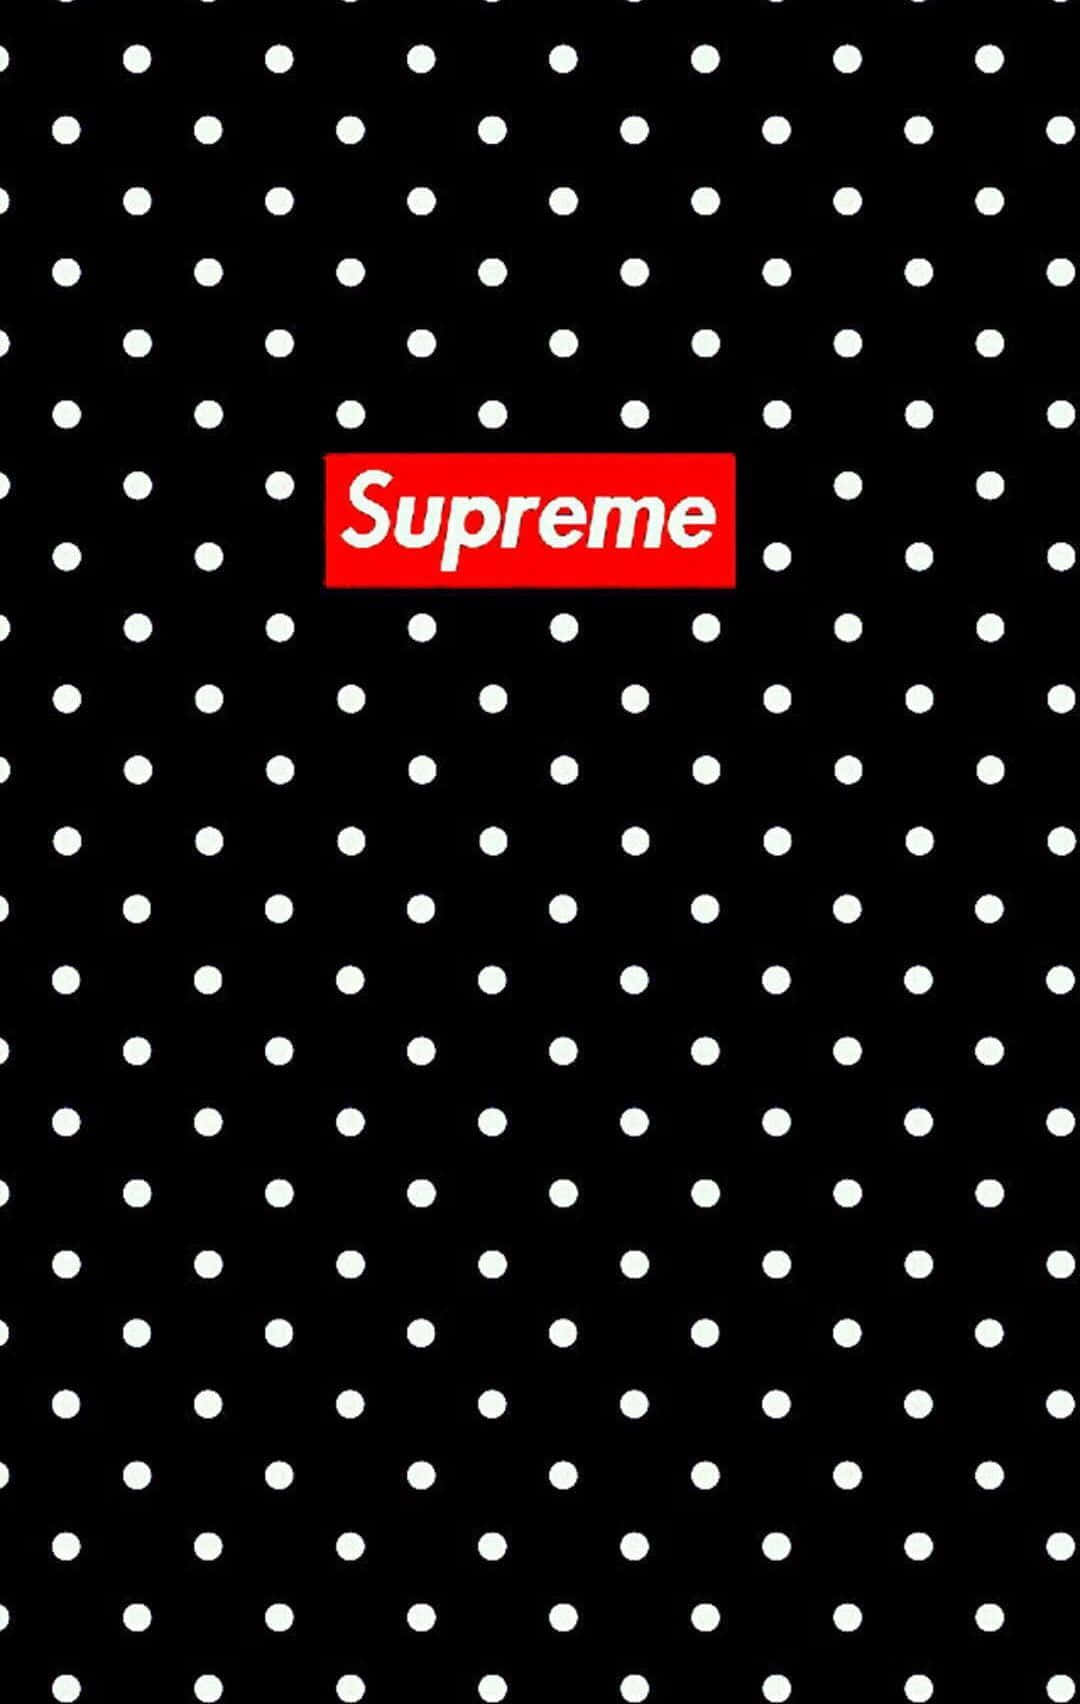 Show off your style with Supreme Drip Wallpaper